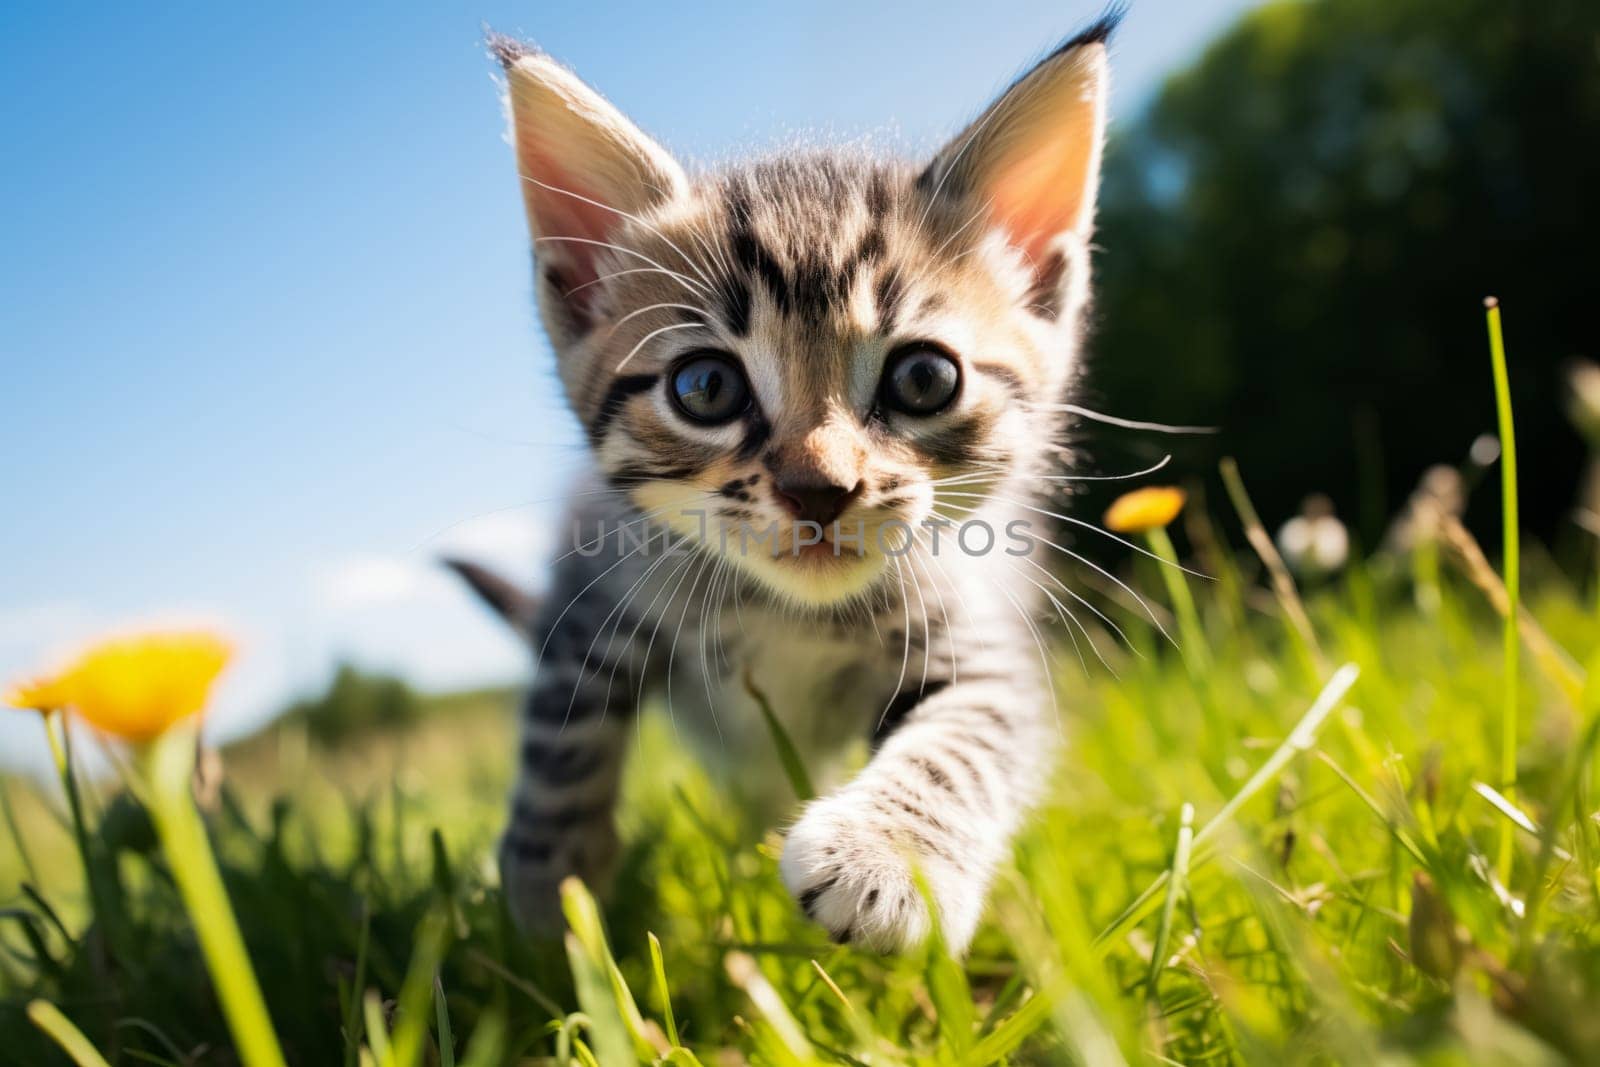 Playful Cute Kitten outdoors in Sunlit Grass. Kitten excitement and wonder as it explores the natural environment on a sunny day